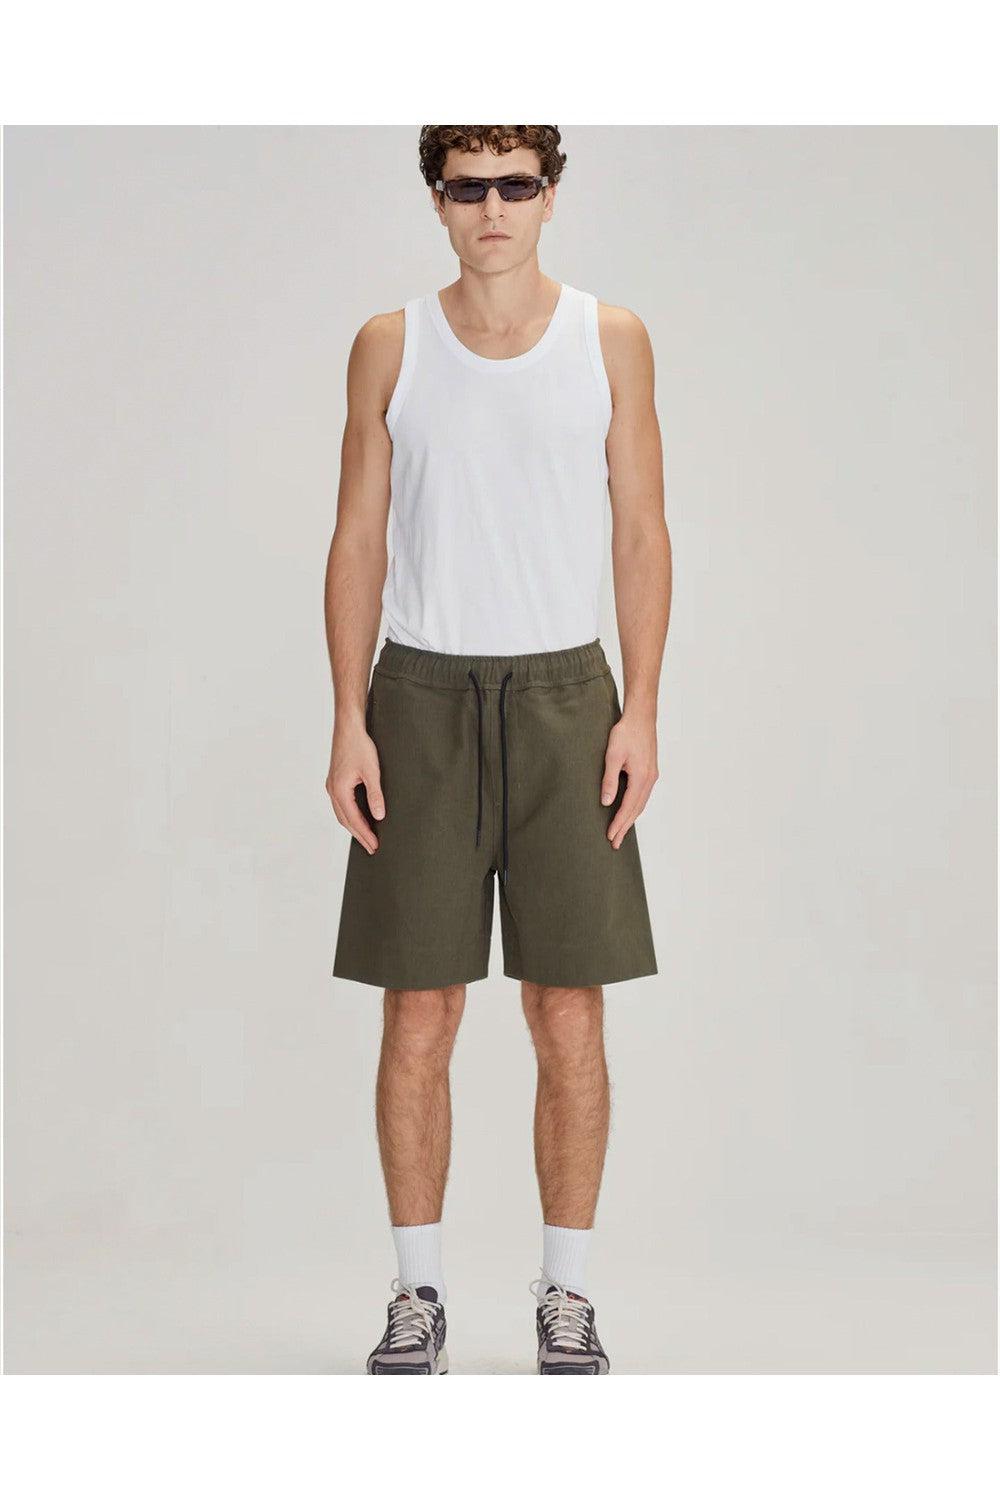 Commoners Standard Walkshort - Olive | COMMONERS | Mad About The Boy